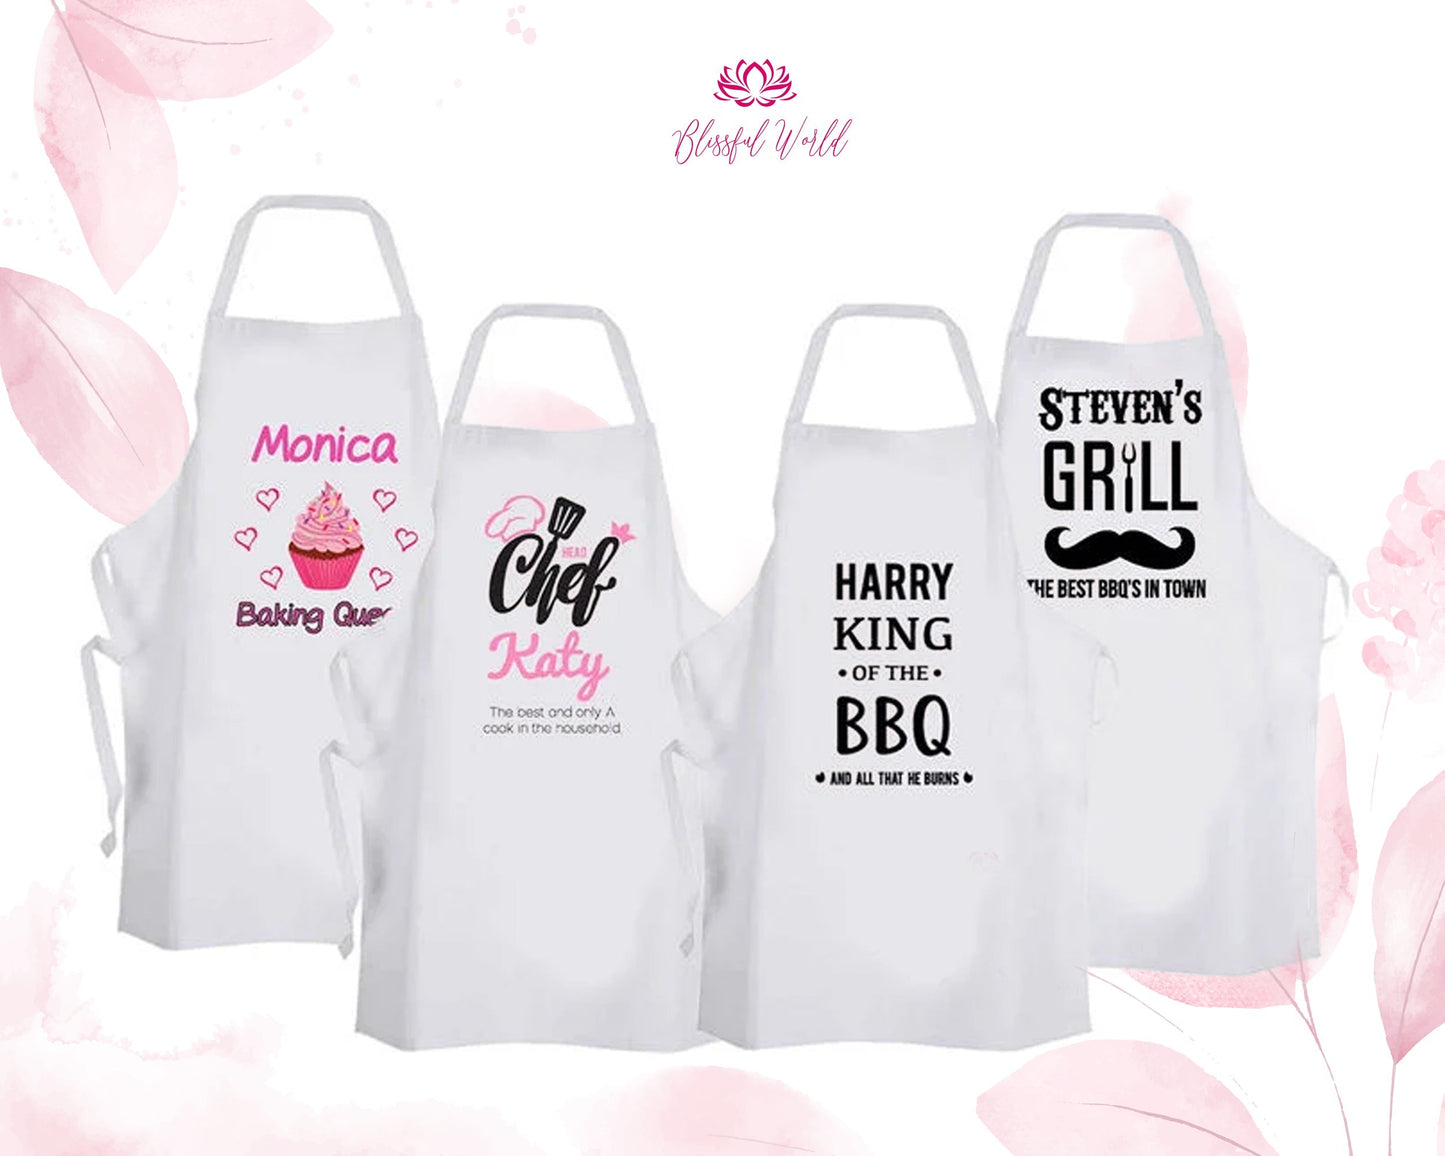 Kids Aprons Customized Aprons Personalized Aprons Custom Apron Full-Length Bib Apron Your text Here Apron Chef Aprons Cooking Apron BBQ Apron